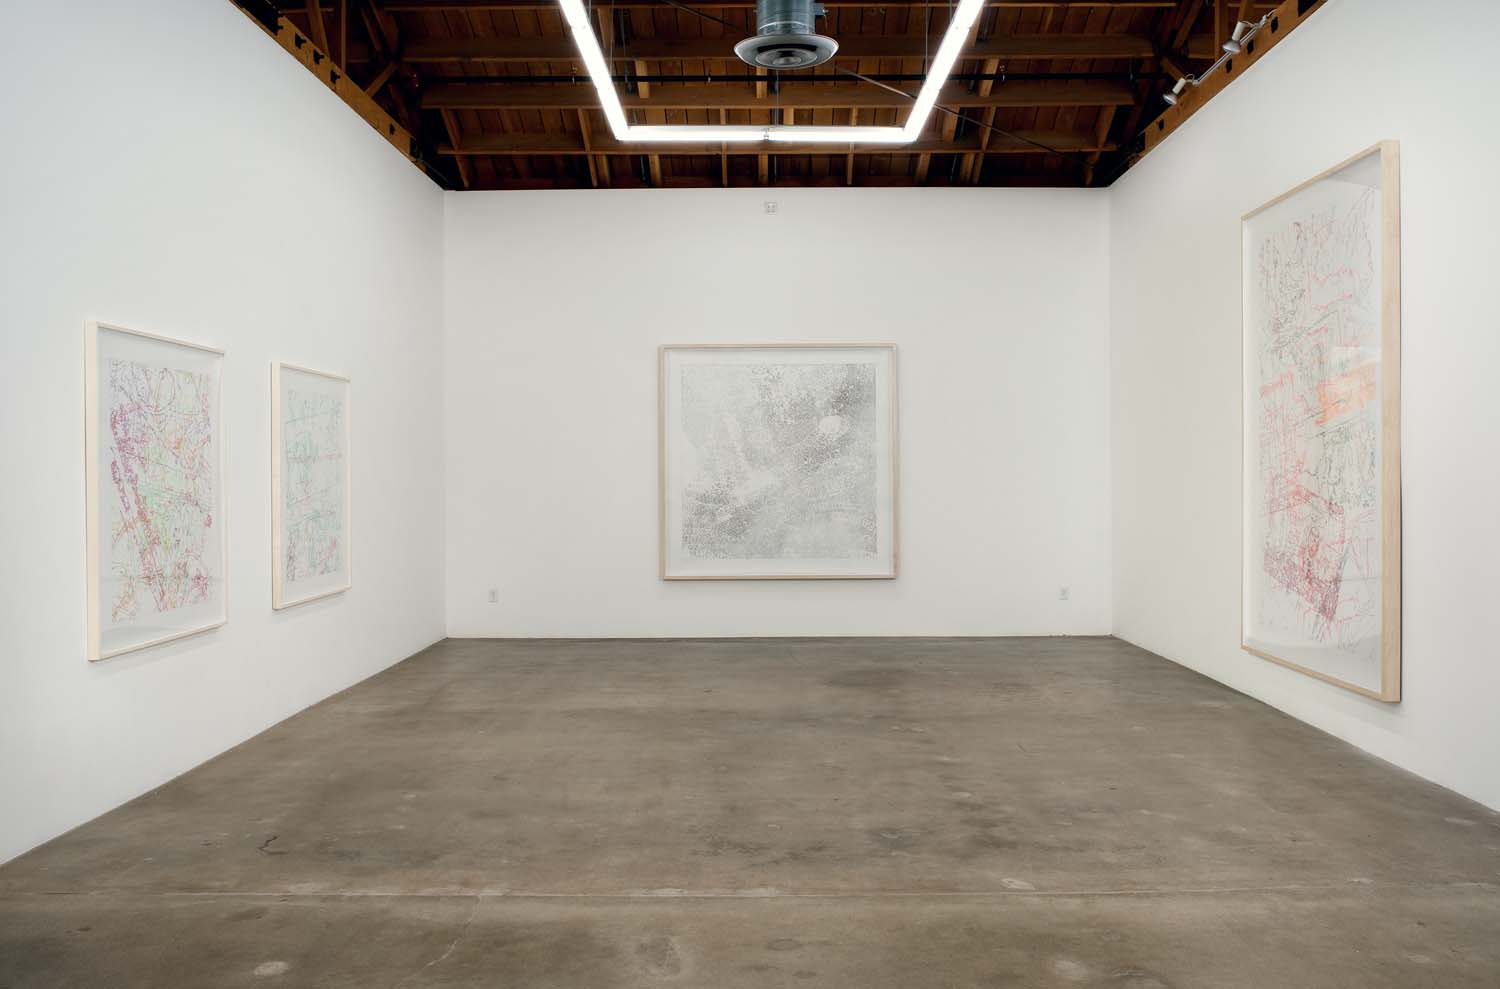 "From the LA River to Lackawanna," Susanne Vielmetter Los Angeles Projects, Los Angeles, CA, 2012